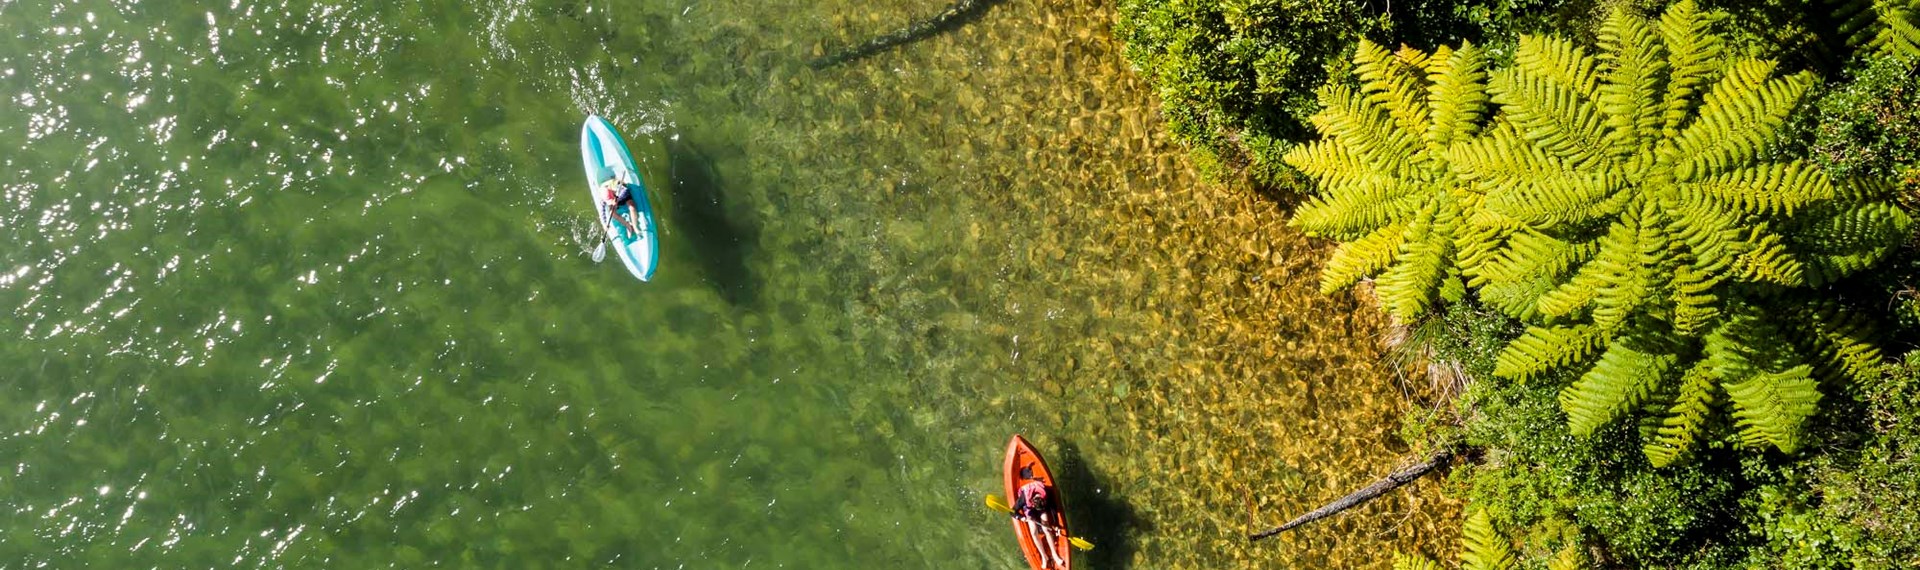 Two kayakers paddle along shoreline in Endeavour Inlet in the Marlborough Sounds in New Zealand's top of the South Island